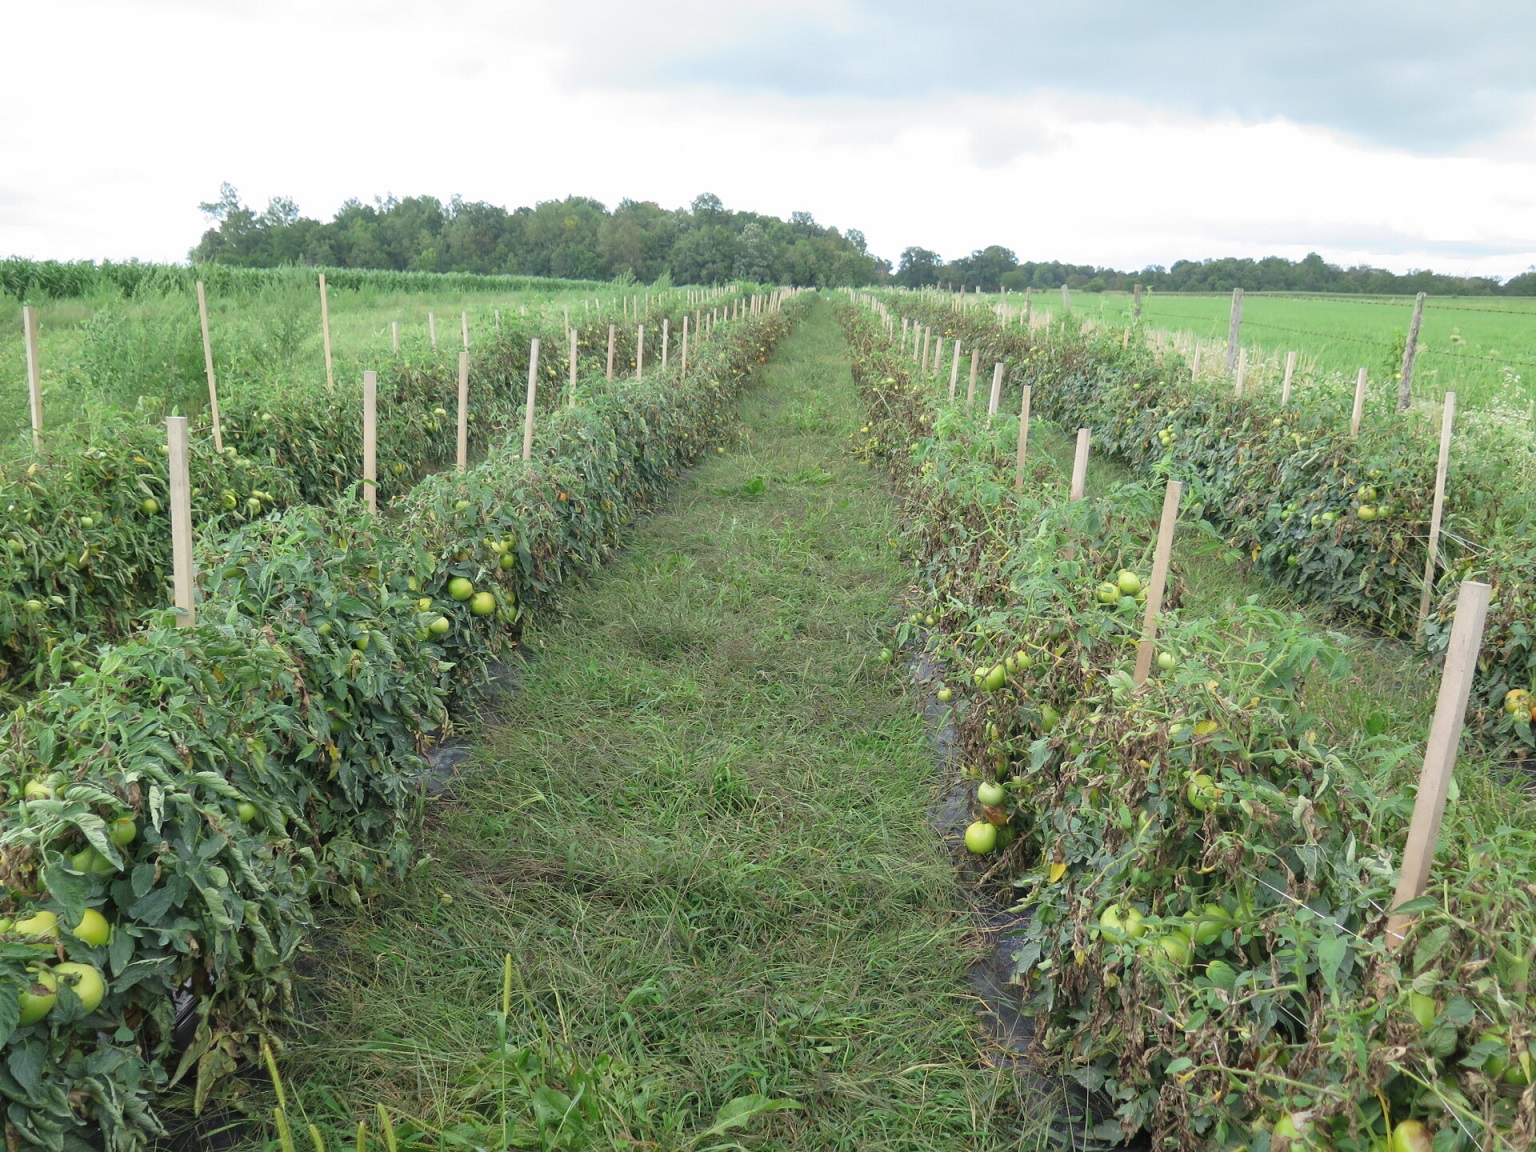 Although late blight is not common in Indiana, when it occurs, it can spread rapidly in a field such as this one.